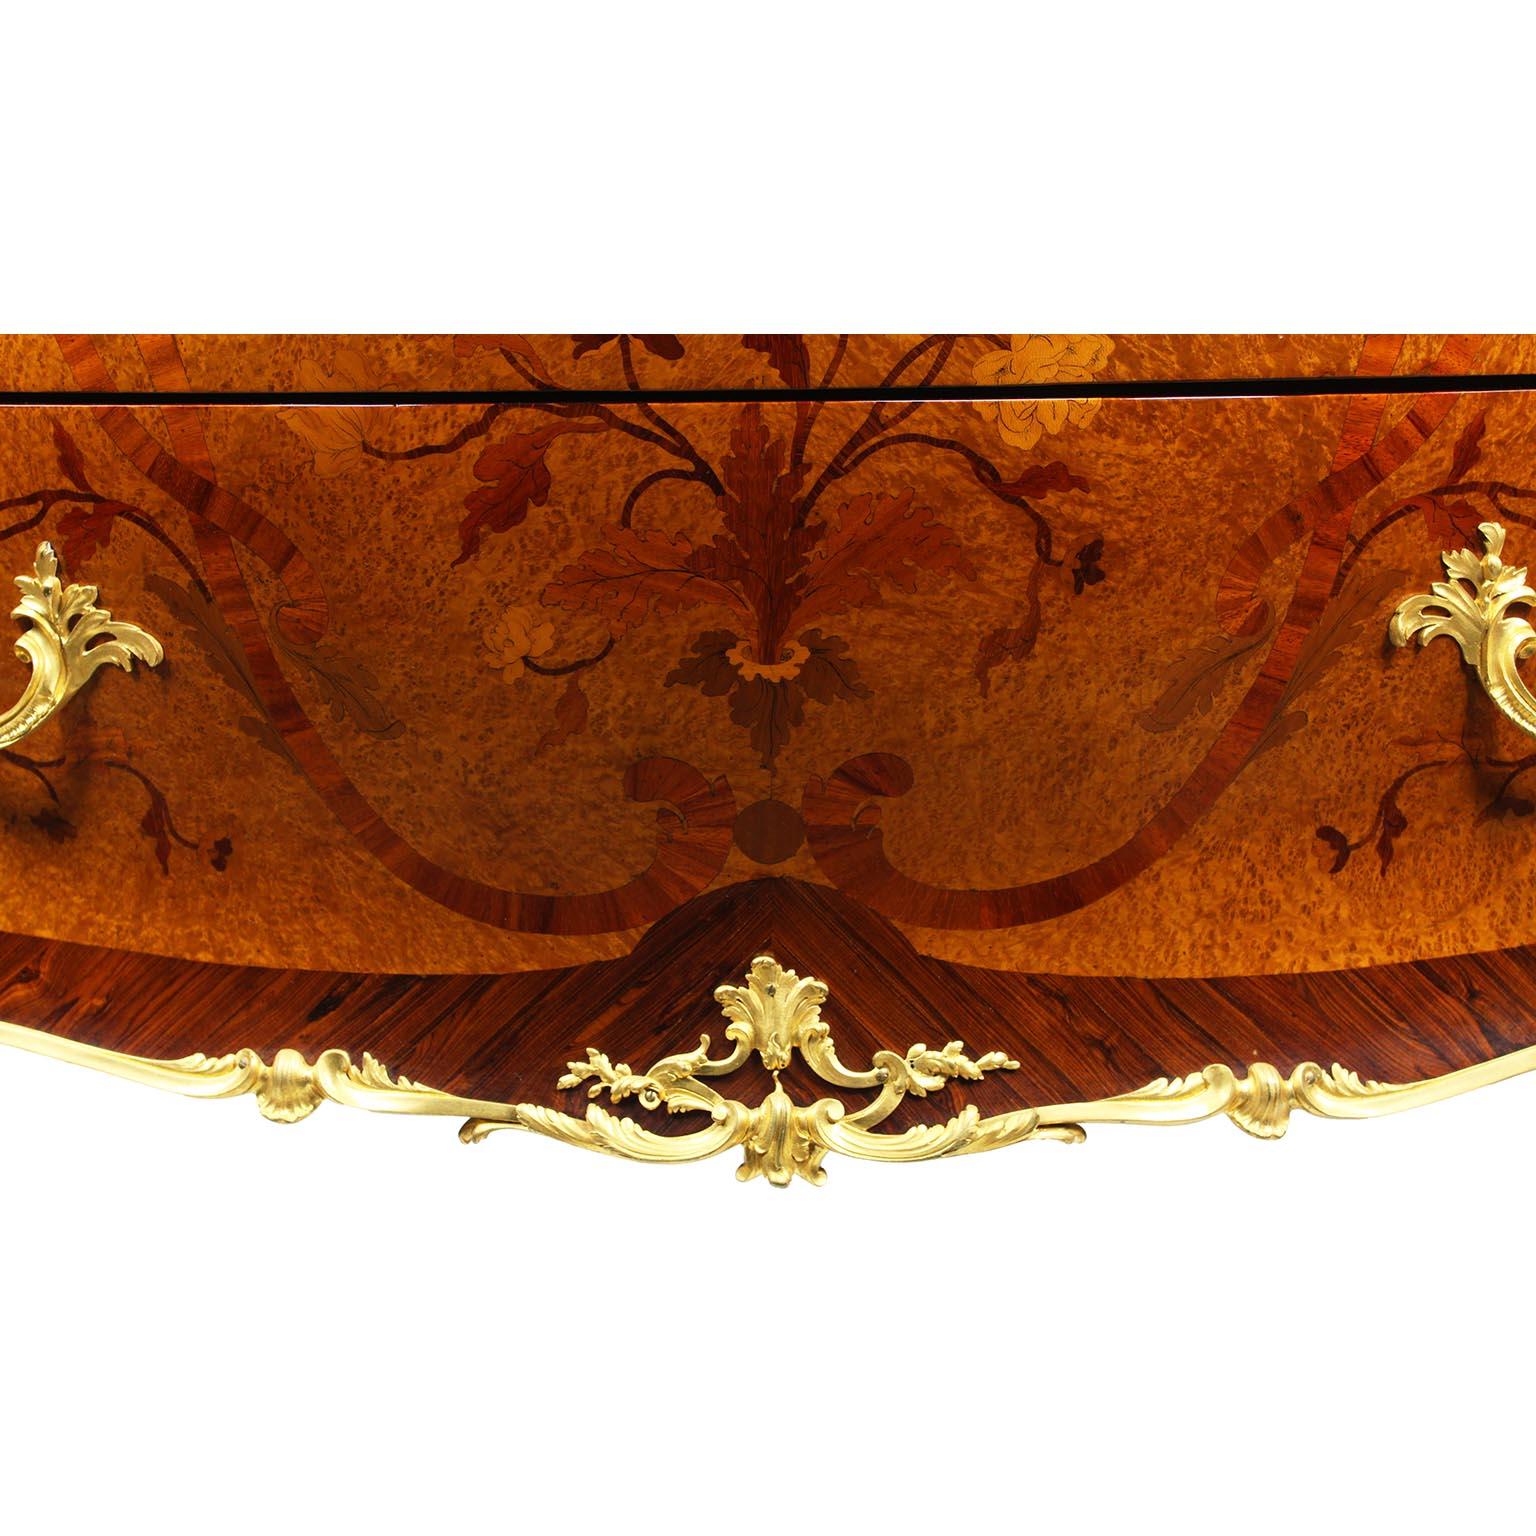 Fine French Louis XV Style Ormolu-Mounted Bombe Commode Attr. to François Linke For Sale 2